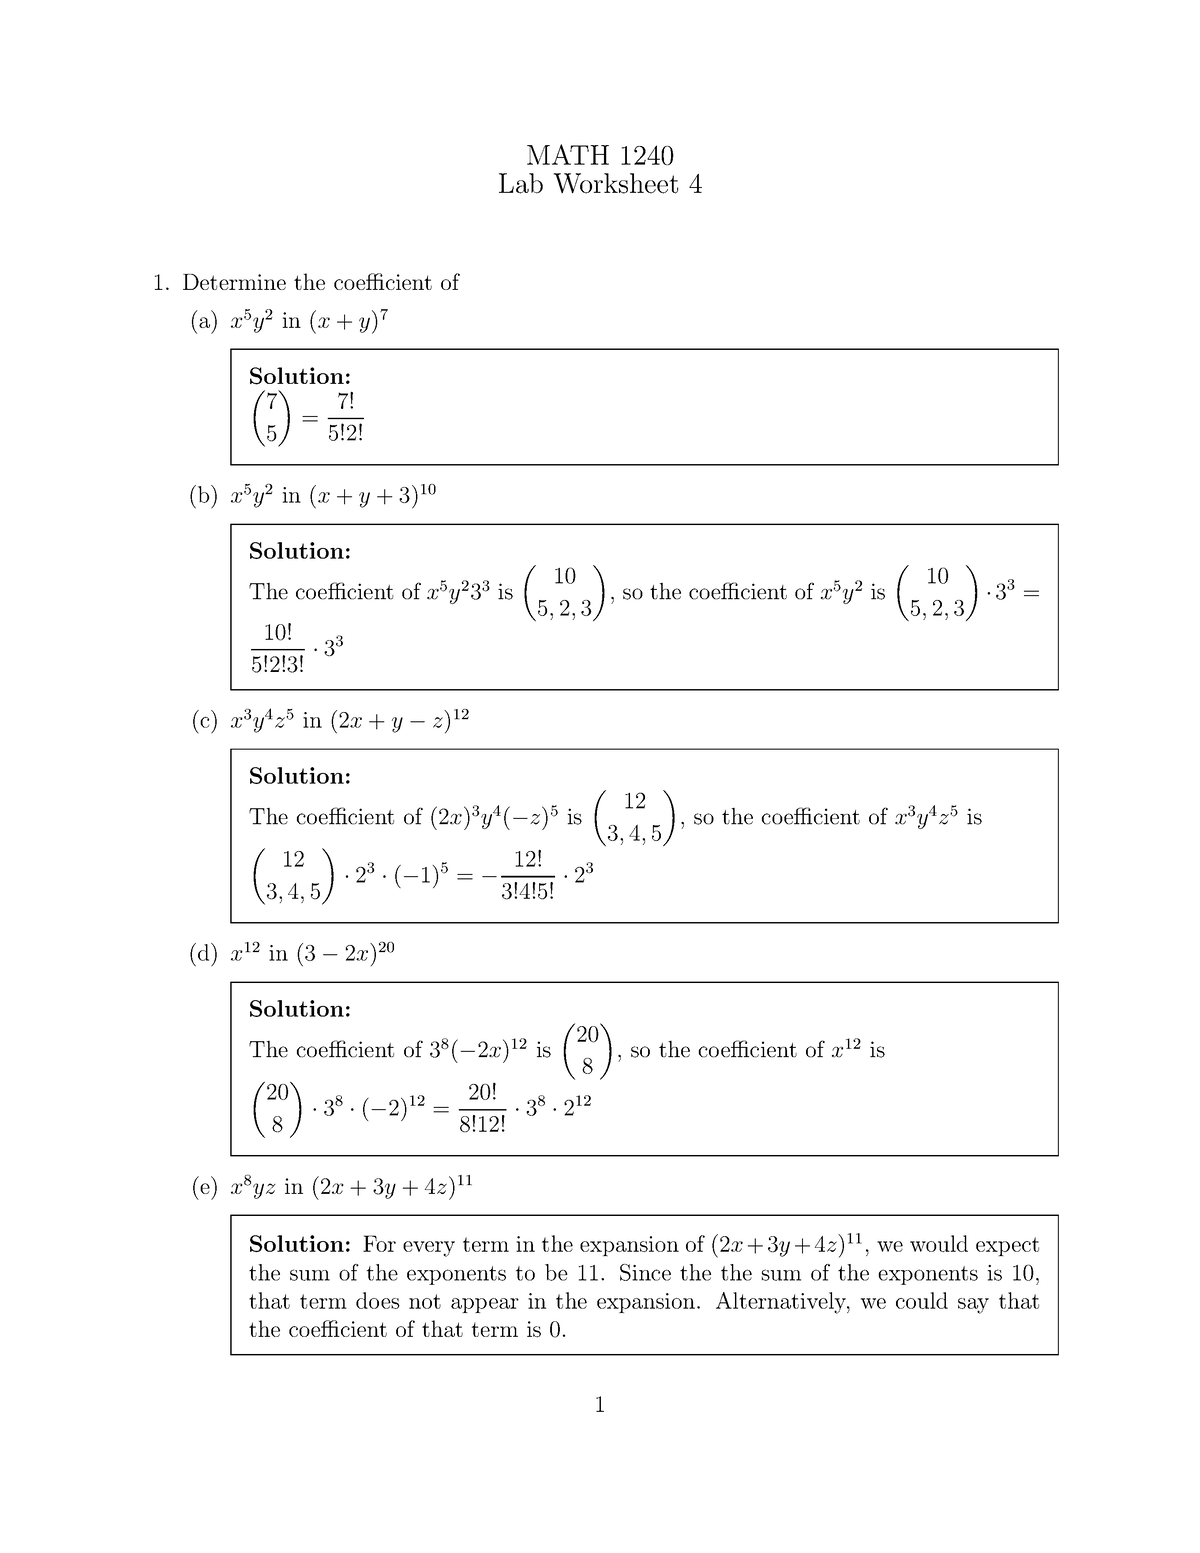 worksheet-4solutions-math-1240-lab-worksheet-4-determine-the-coefficient-of-a-x-5-y-2-in-x